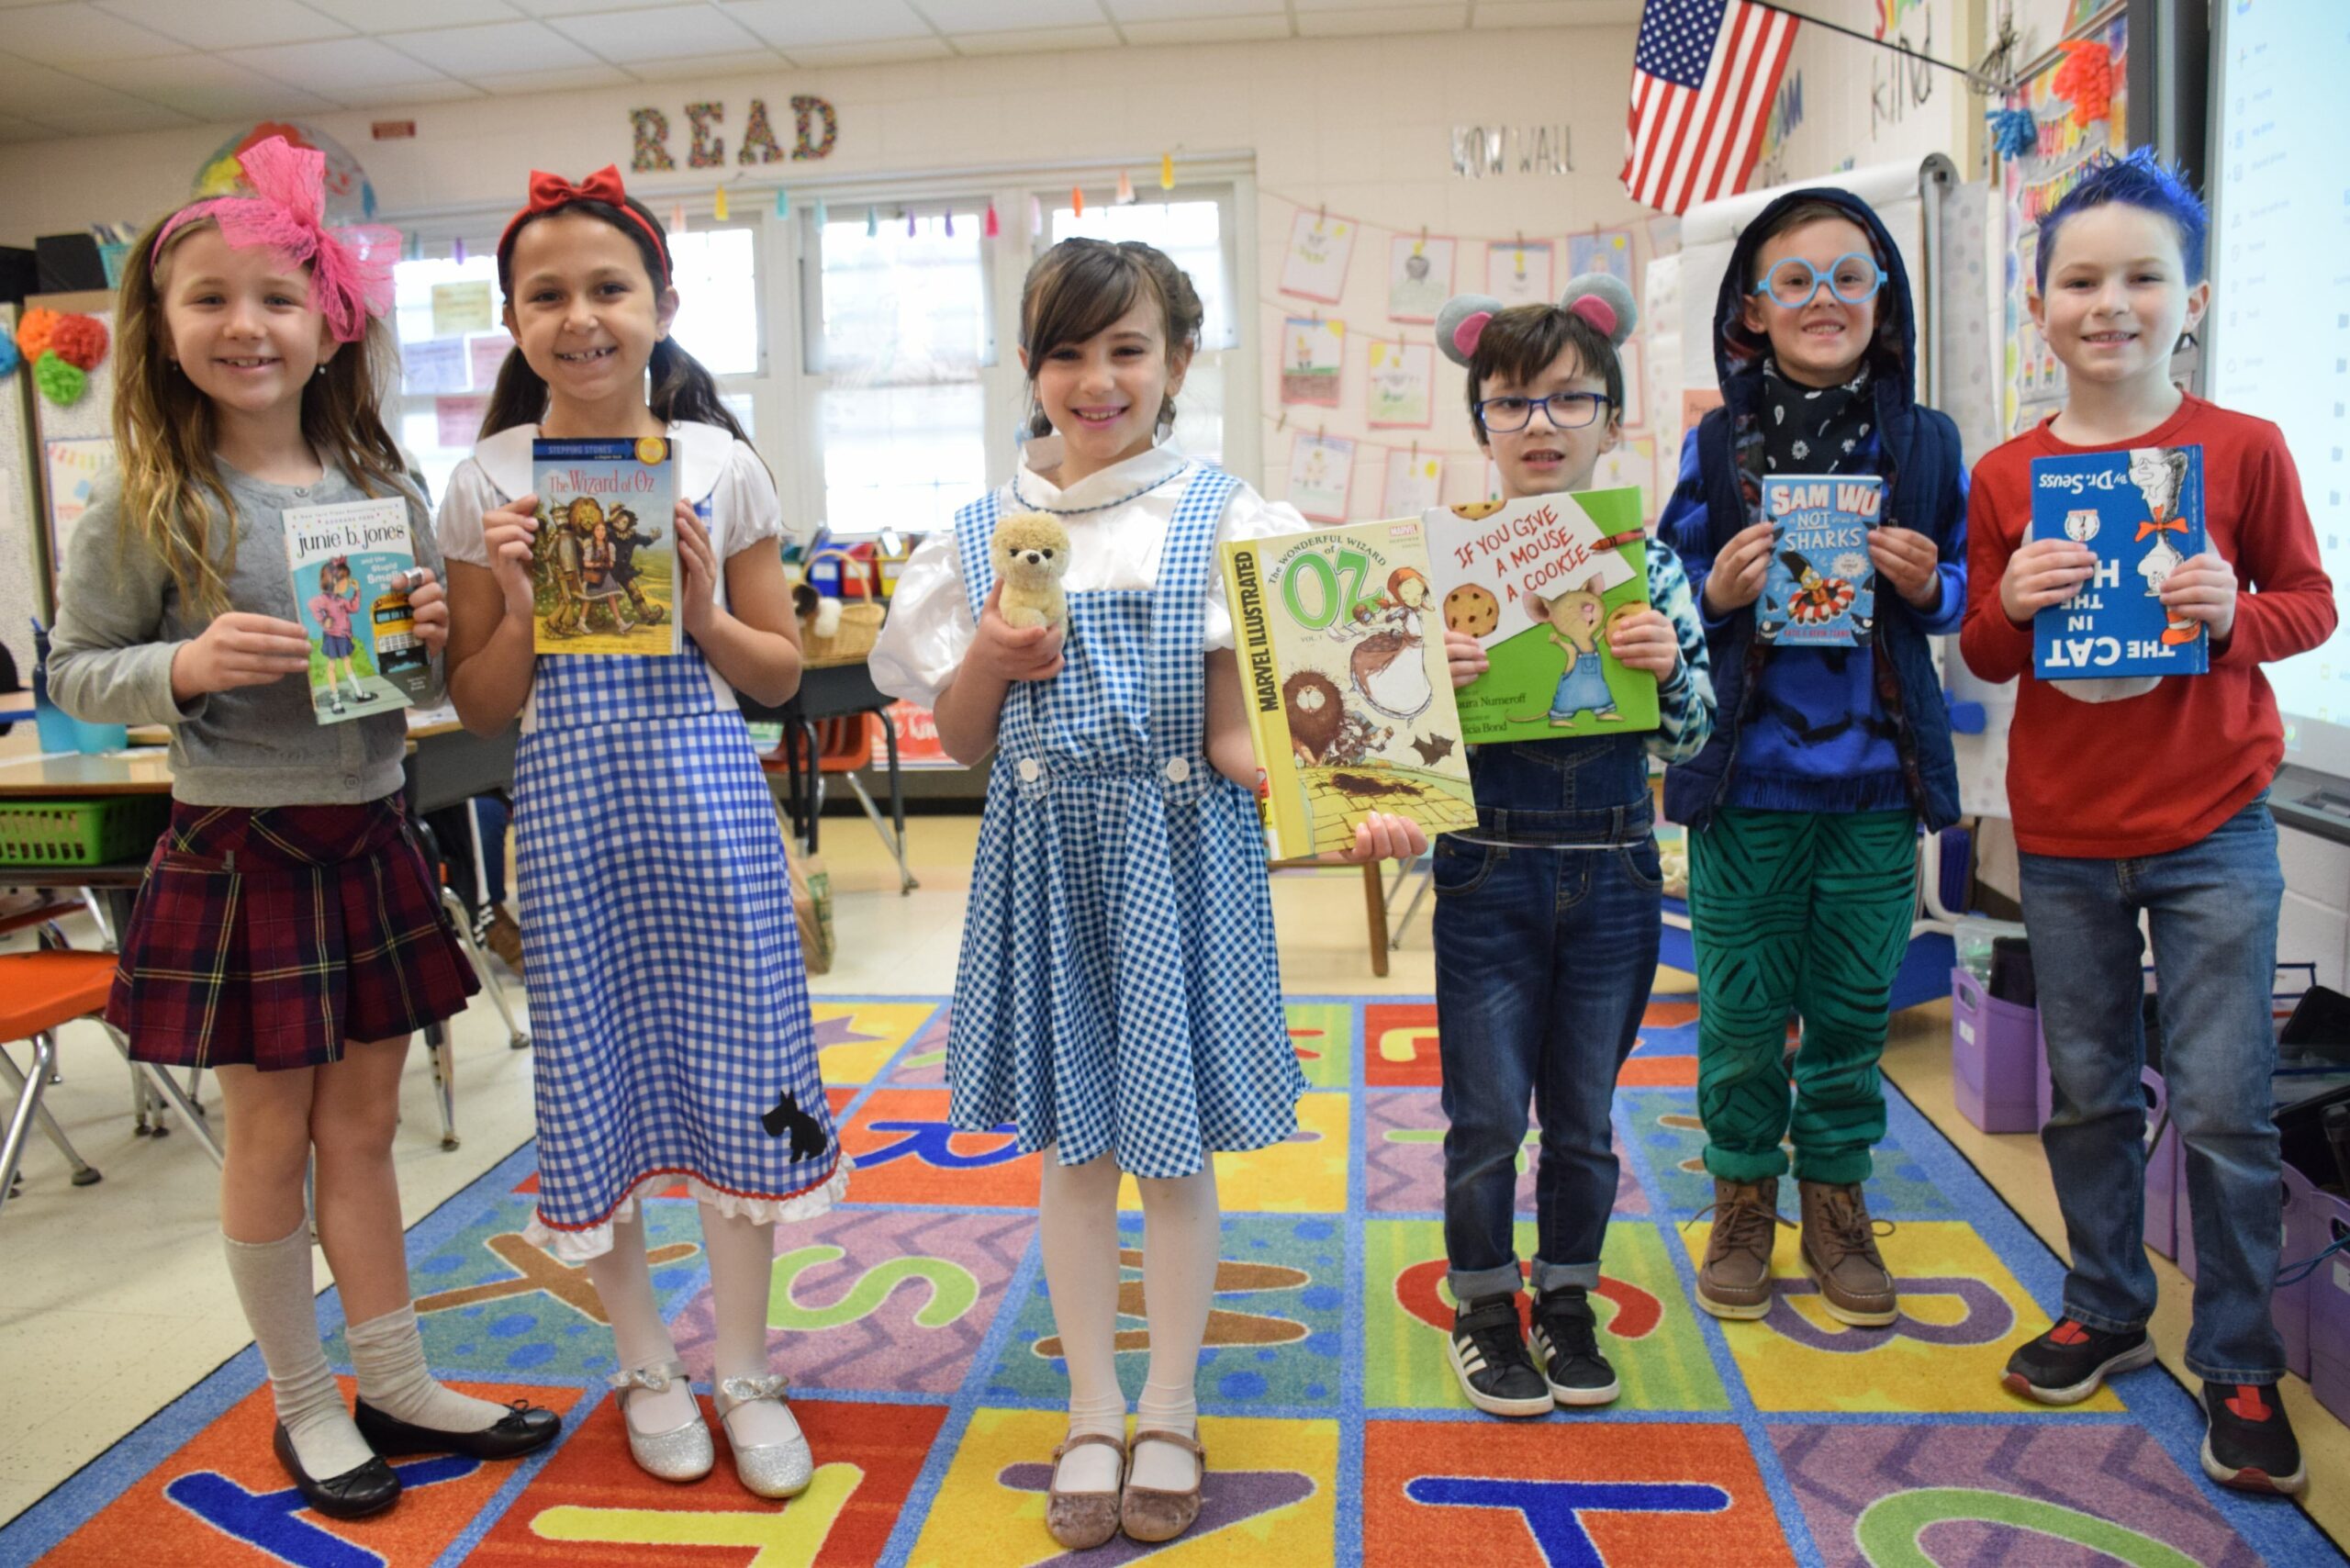 Second-graders at South Street Elementary School recently participated in a Book Character Day celebration in recognition of the completion of their first unit in the Readers Workshop. COURTESY EASTPORT-SOUTH MANOR SCHOOL DISTRICT